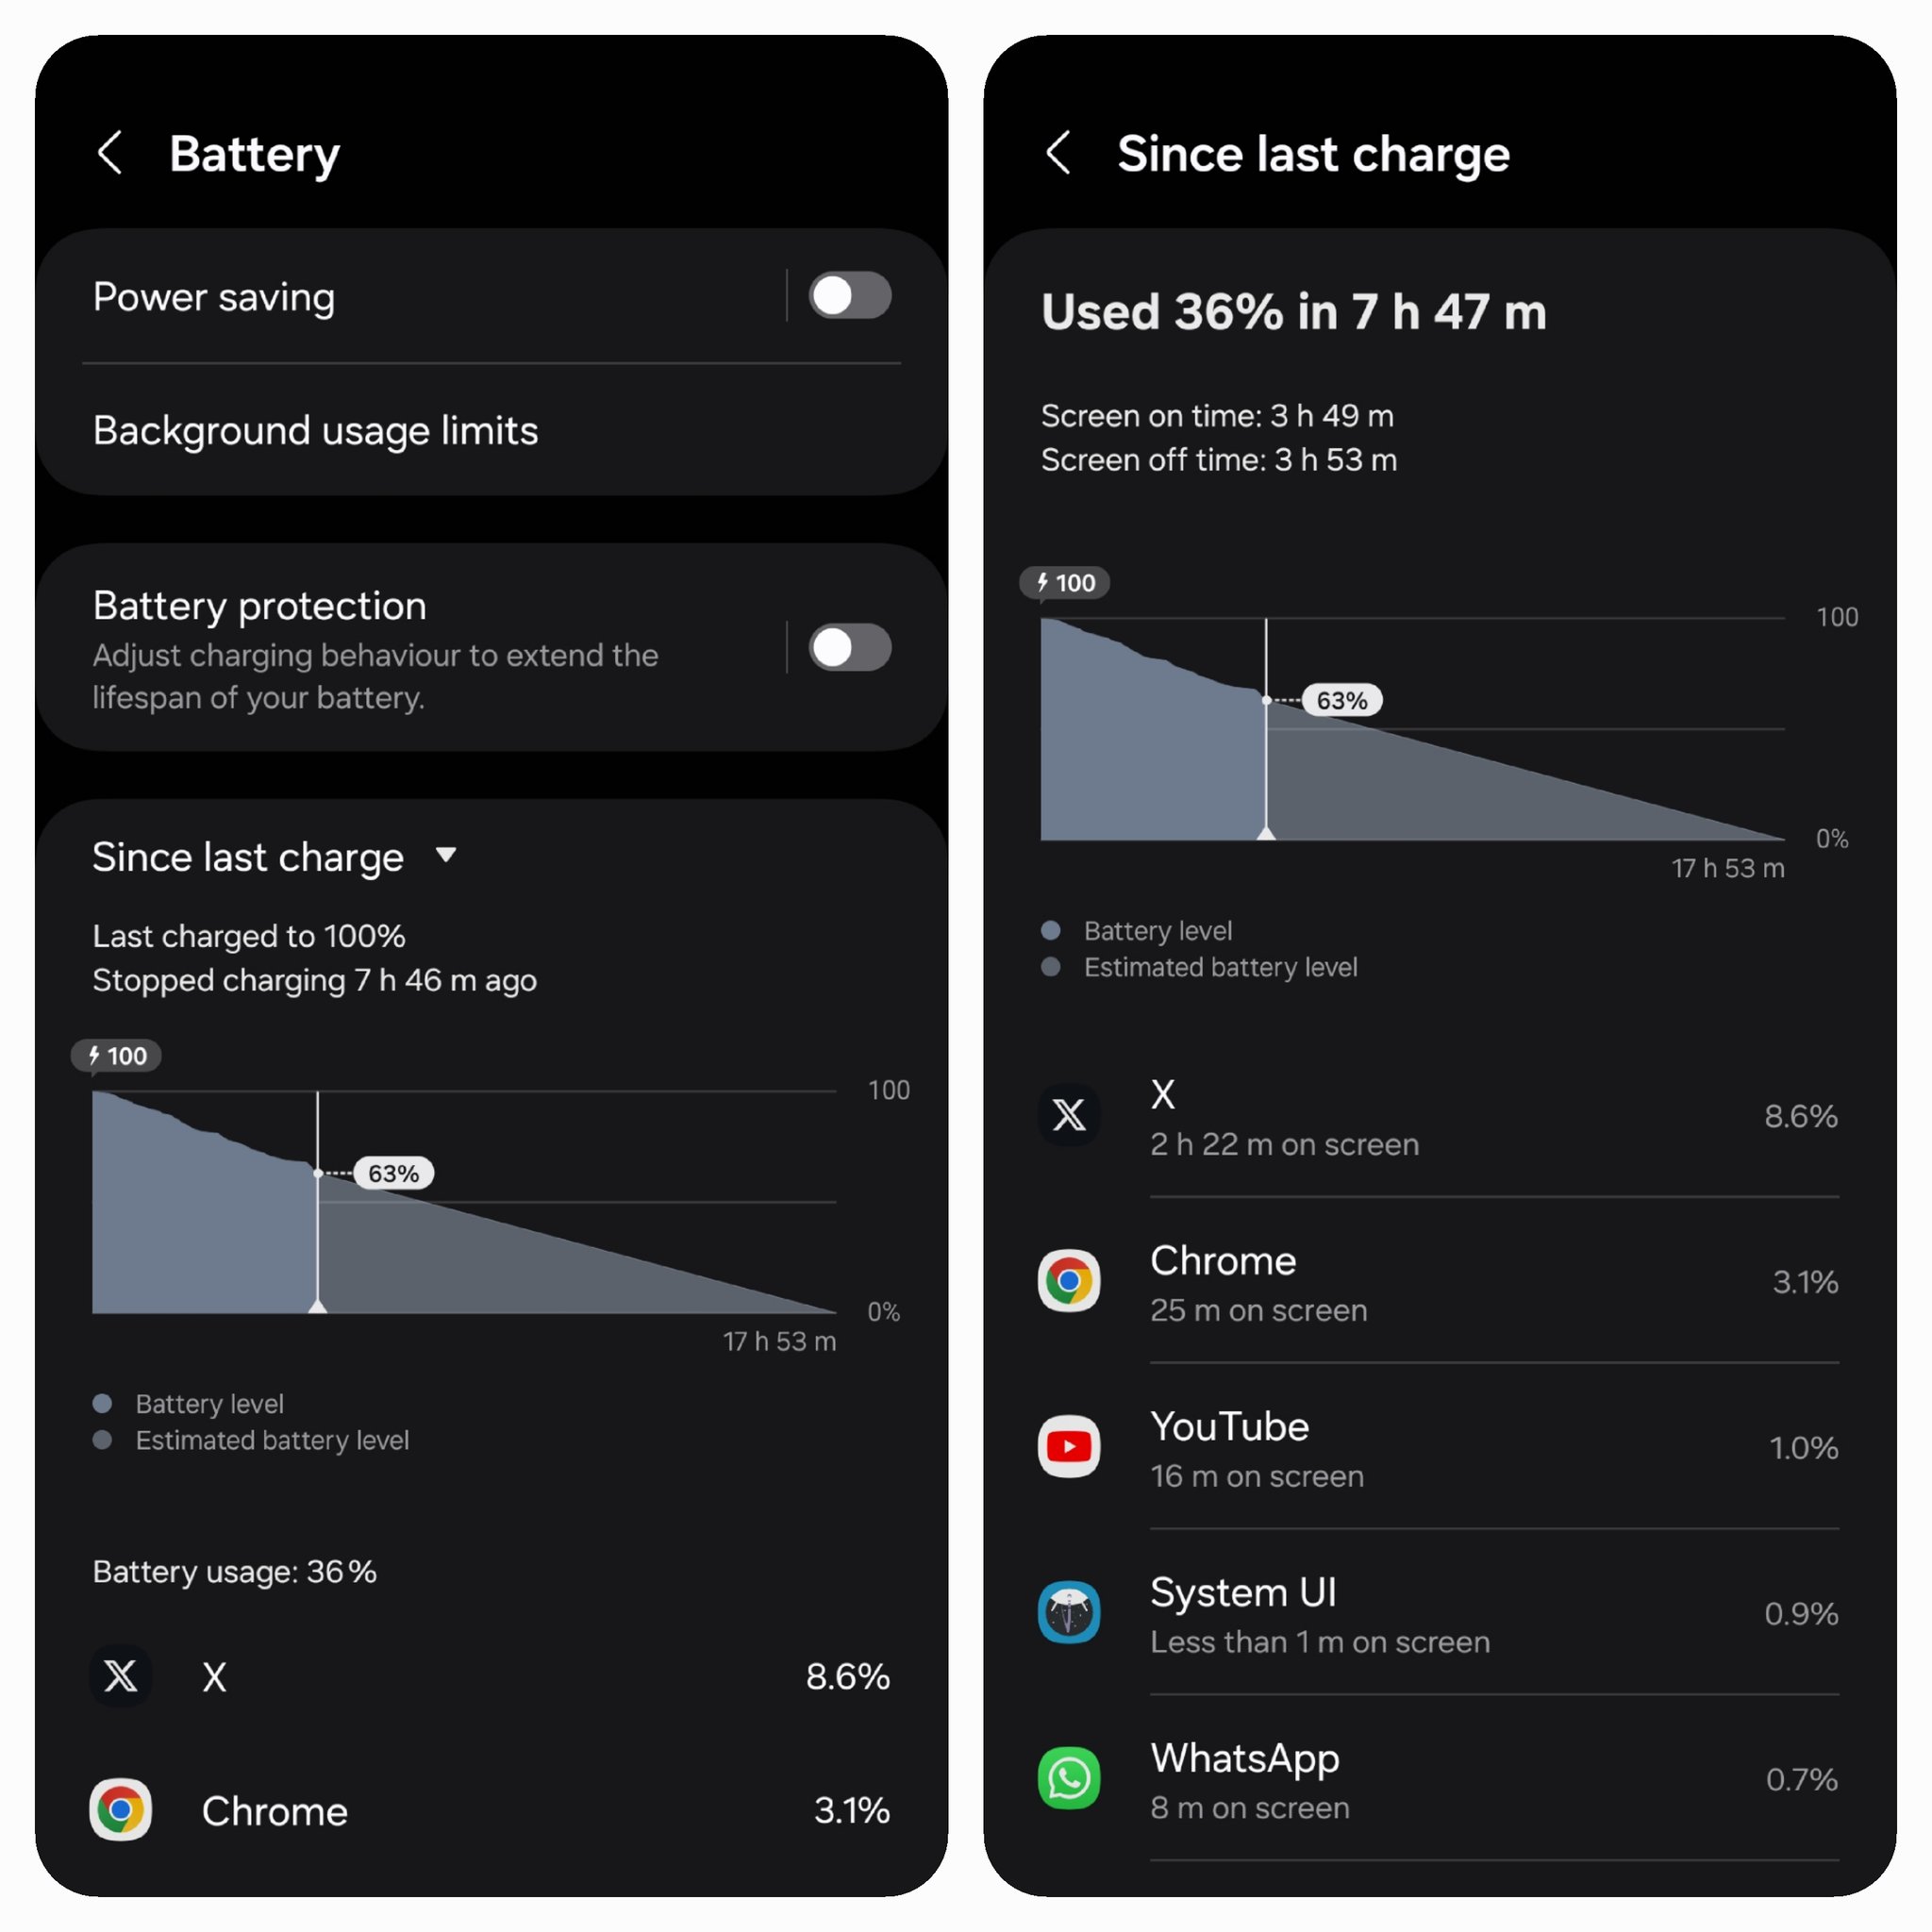 Samsung's 'since last charge' screen.